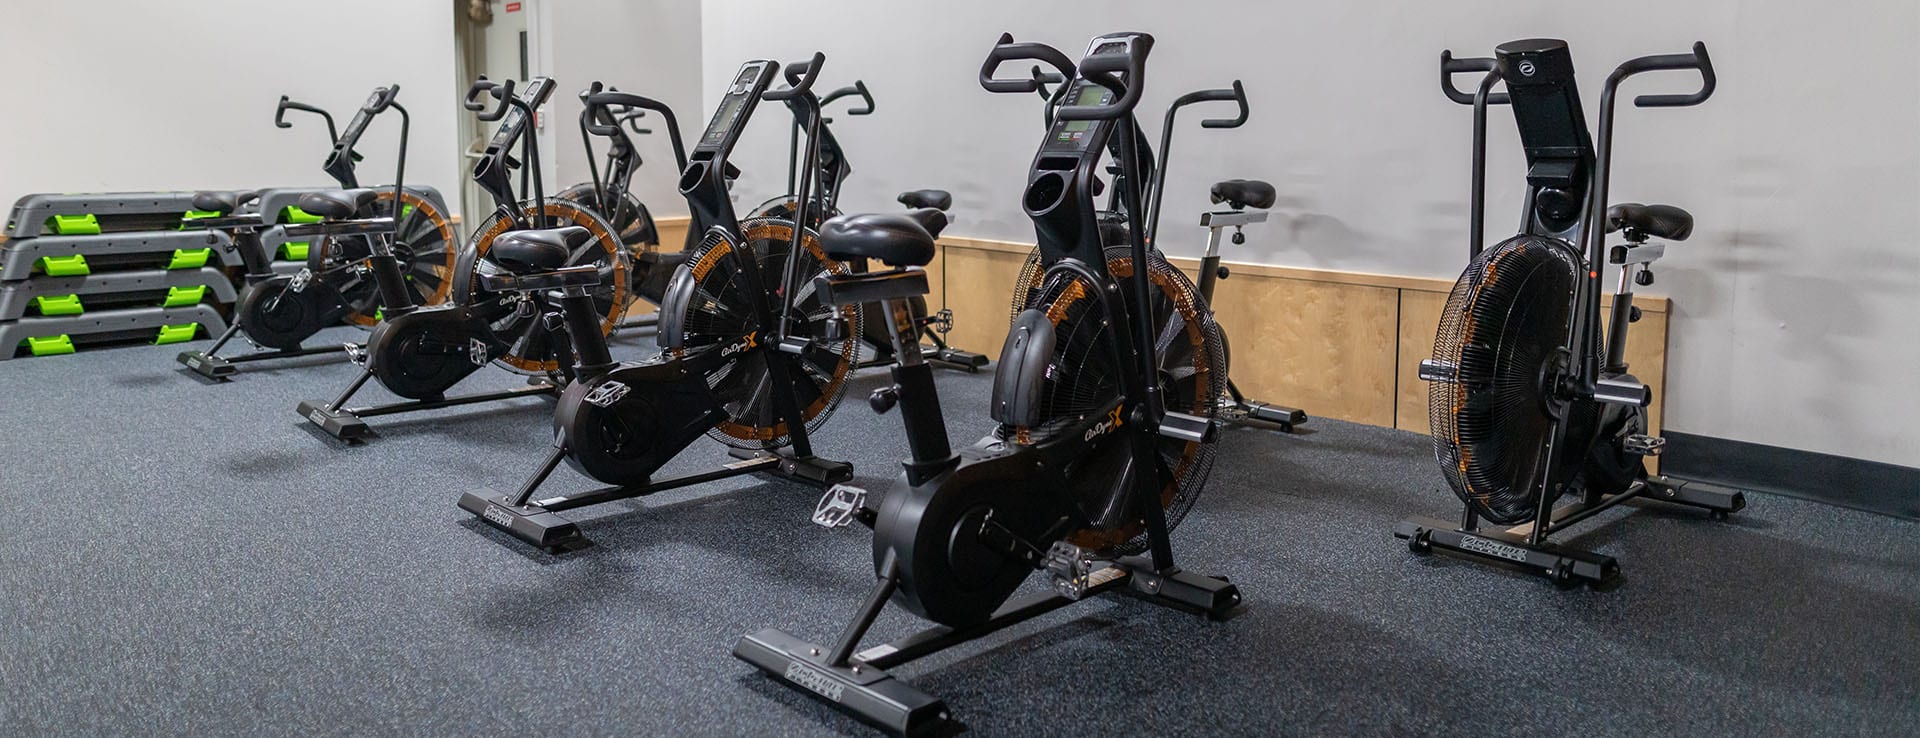 functional training bikes in modern albany gym